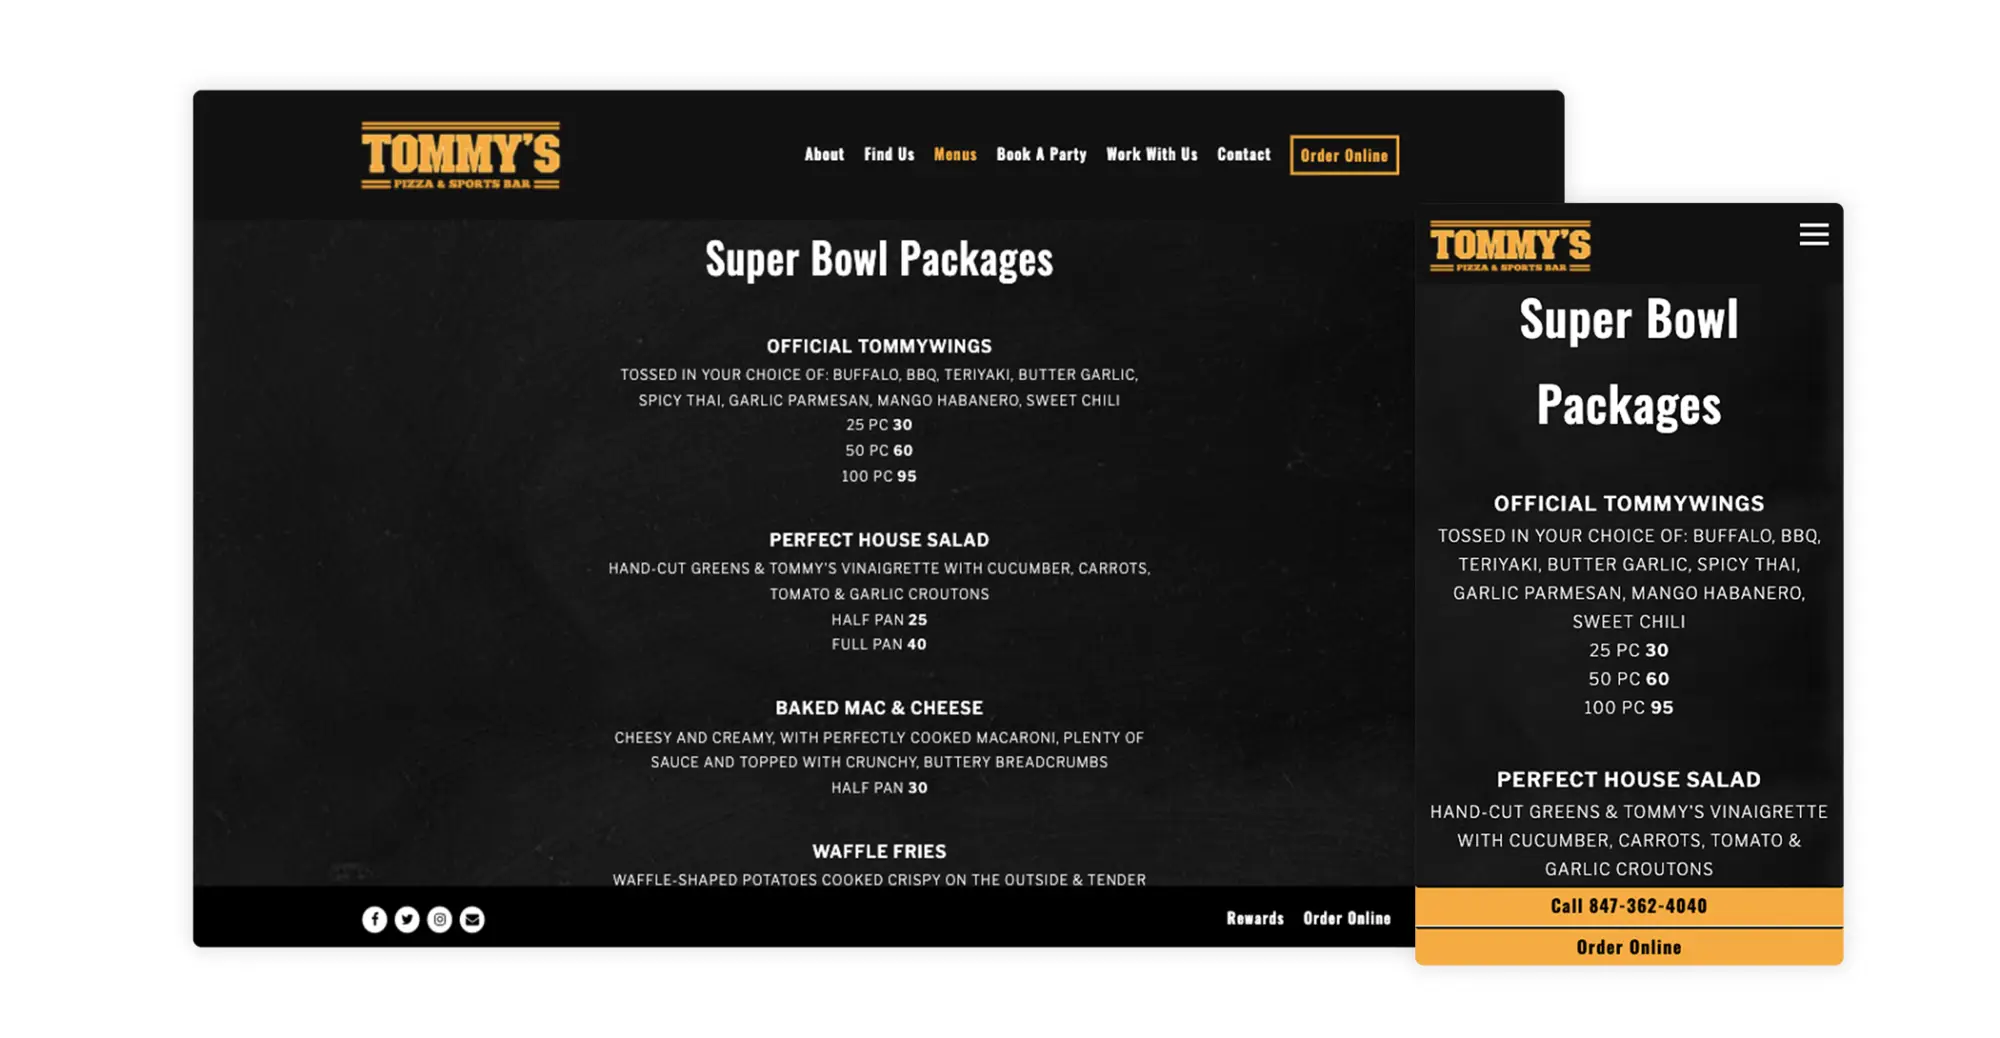 Tommy's Pizza and Sports Bar dedicates a menu to Super Bowl Packages